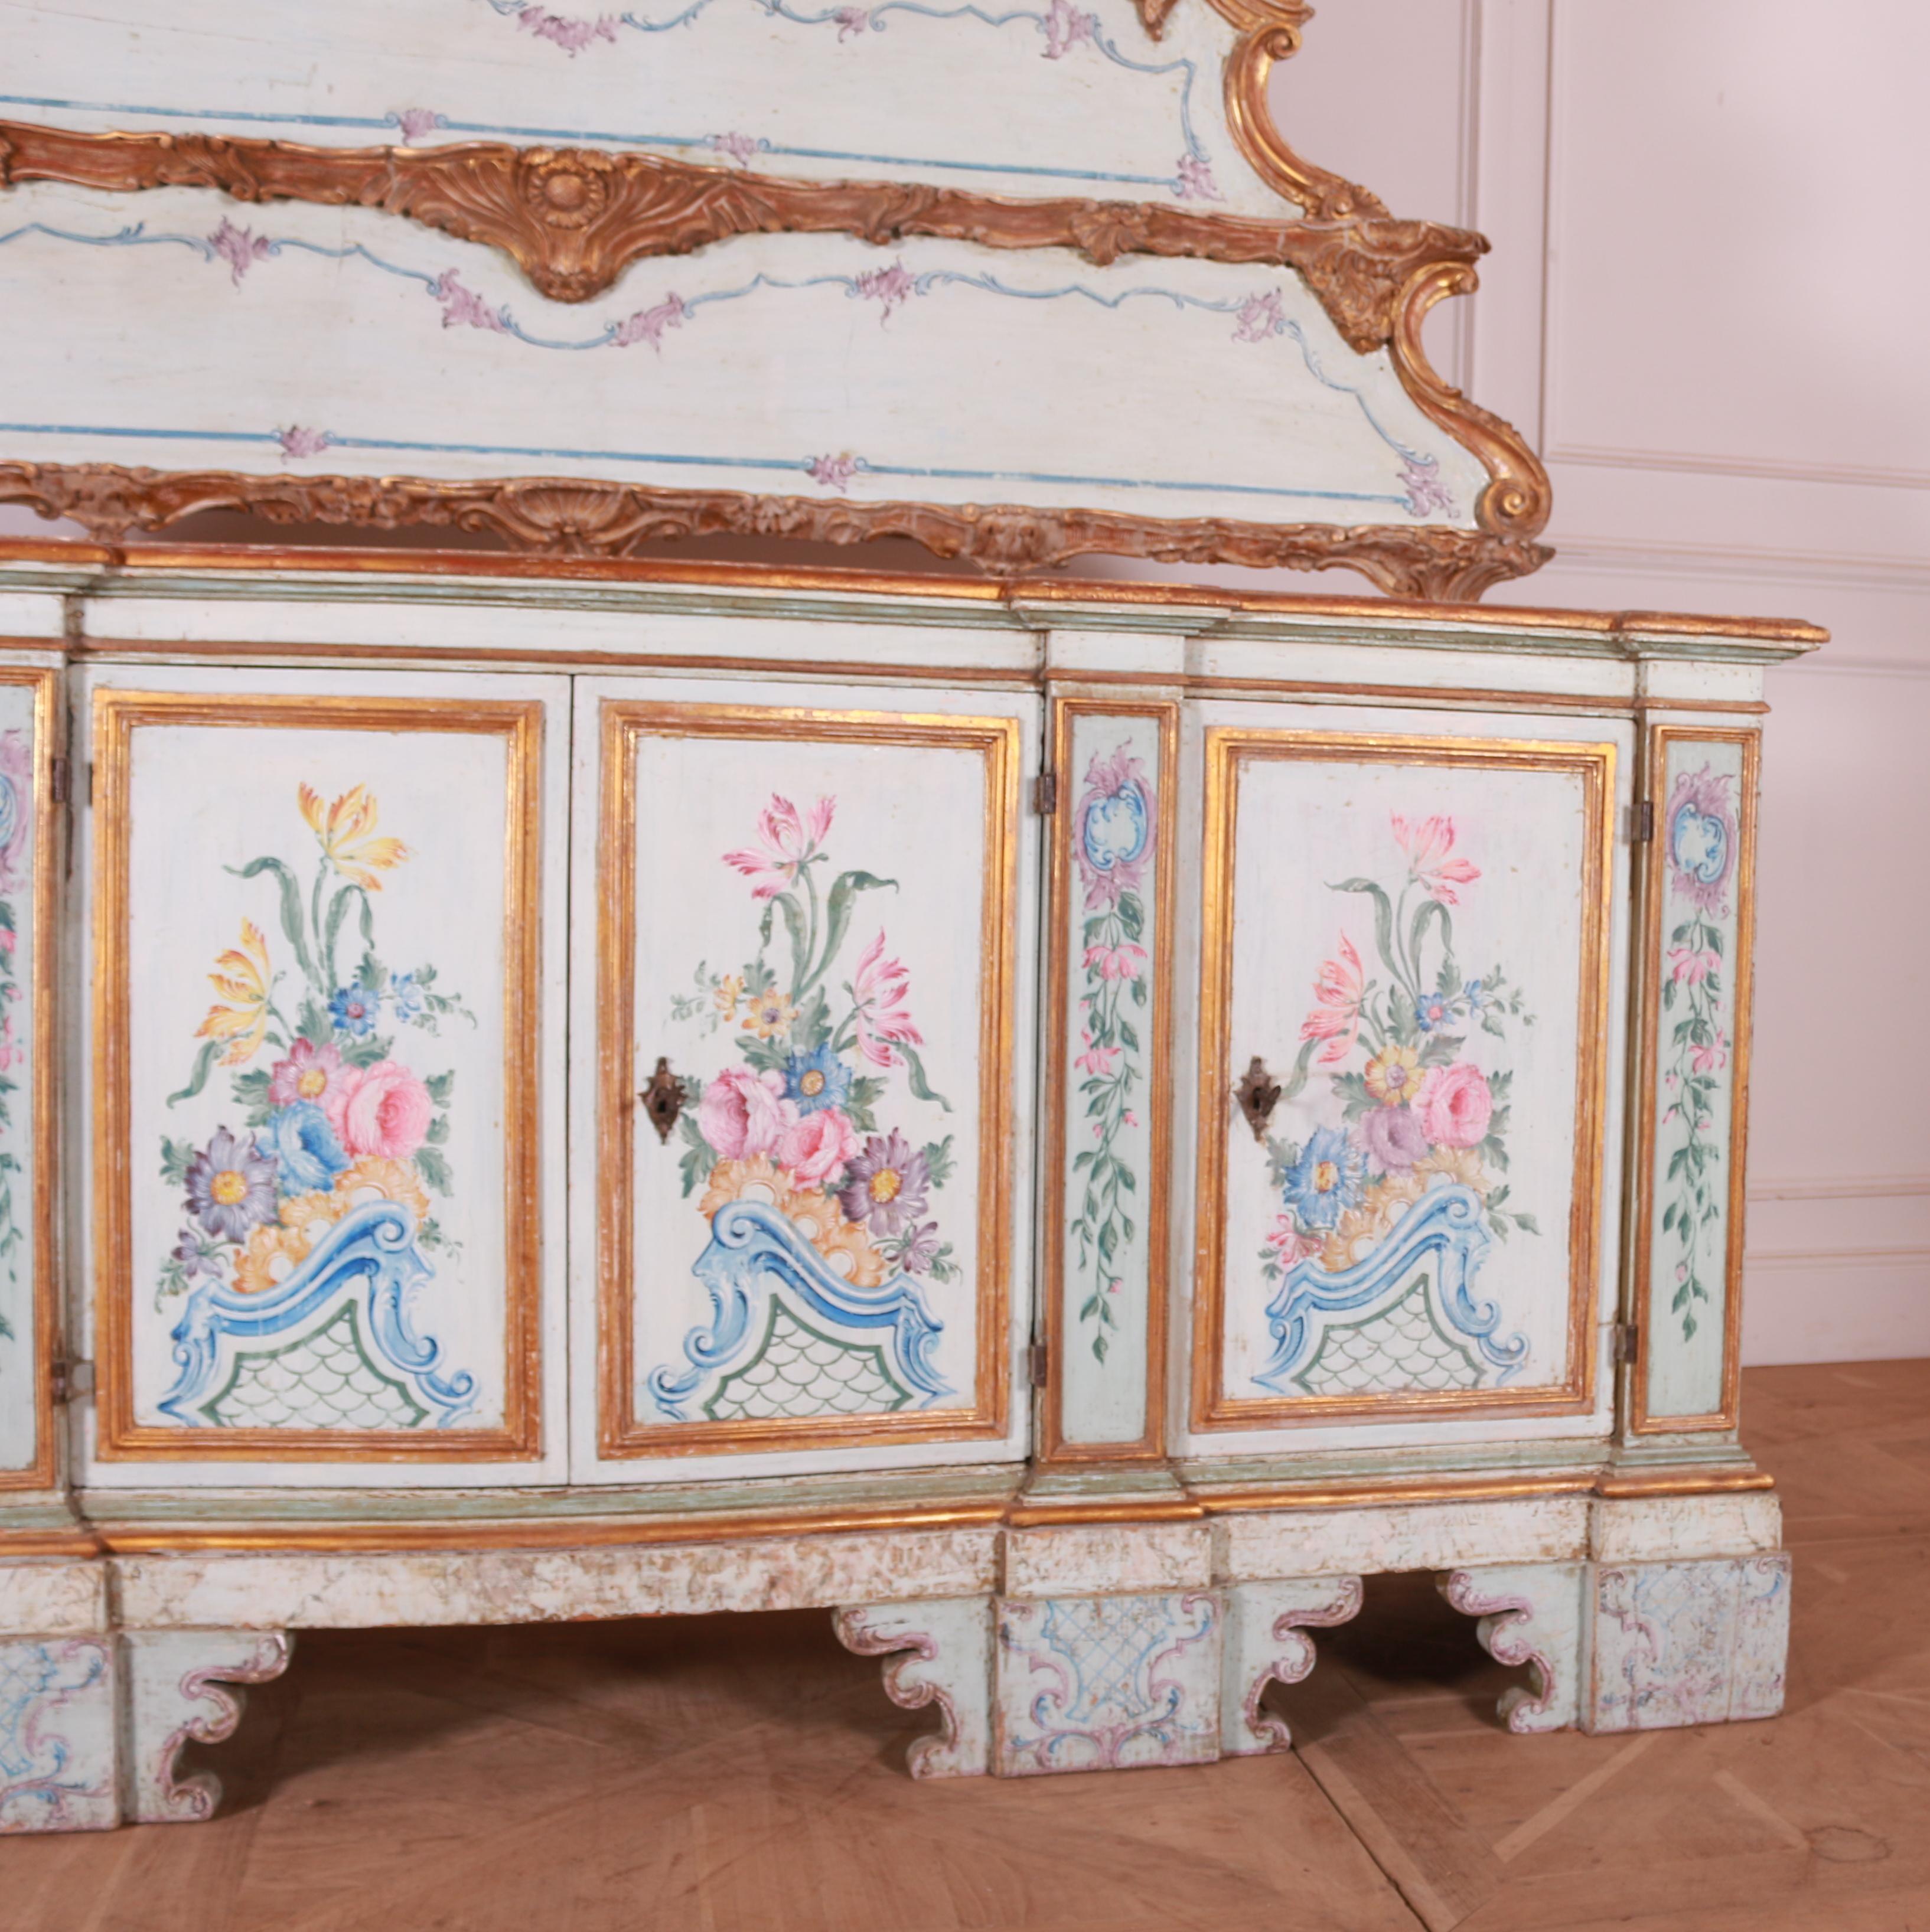 Stunning 18th Century Original Painted Italian Sideboard In Good Condition For Sale In Leamington Spa, Warwickshire